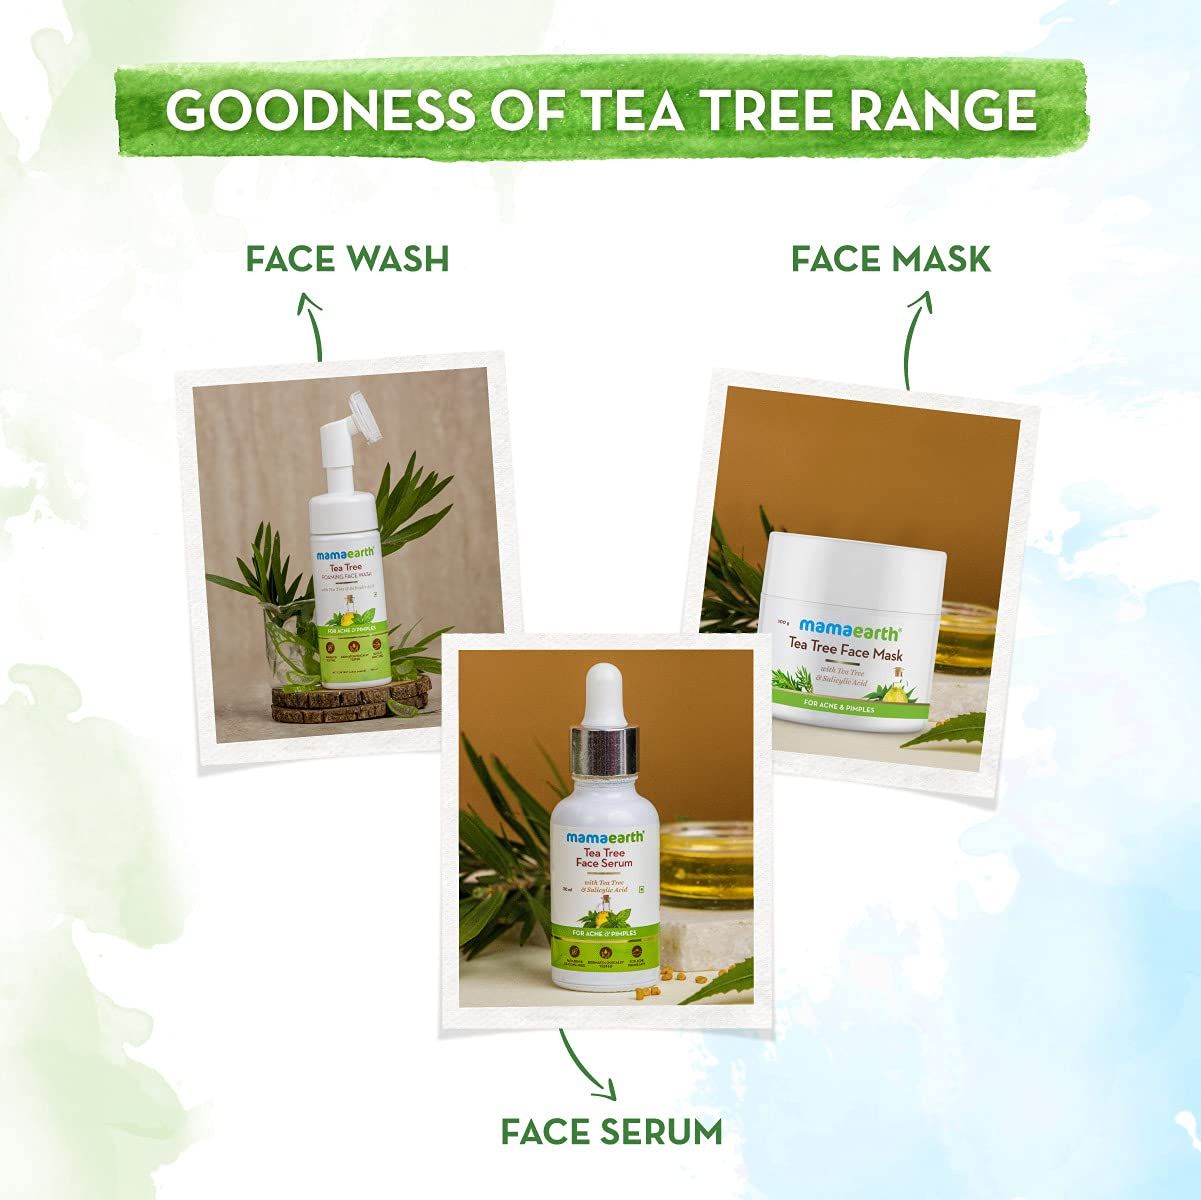 Tea Tree Face Mask for Acne, with Tea Tree and Salicylic Acid for Acne and Pimples - 100g